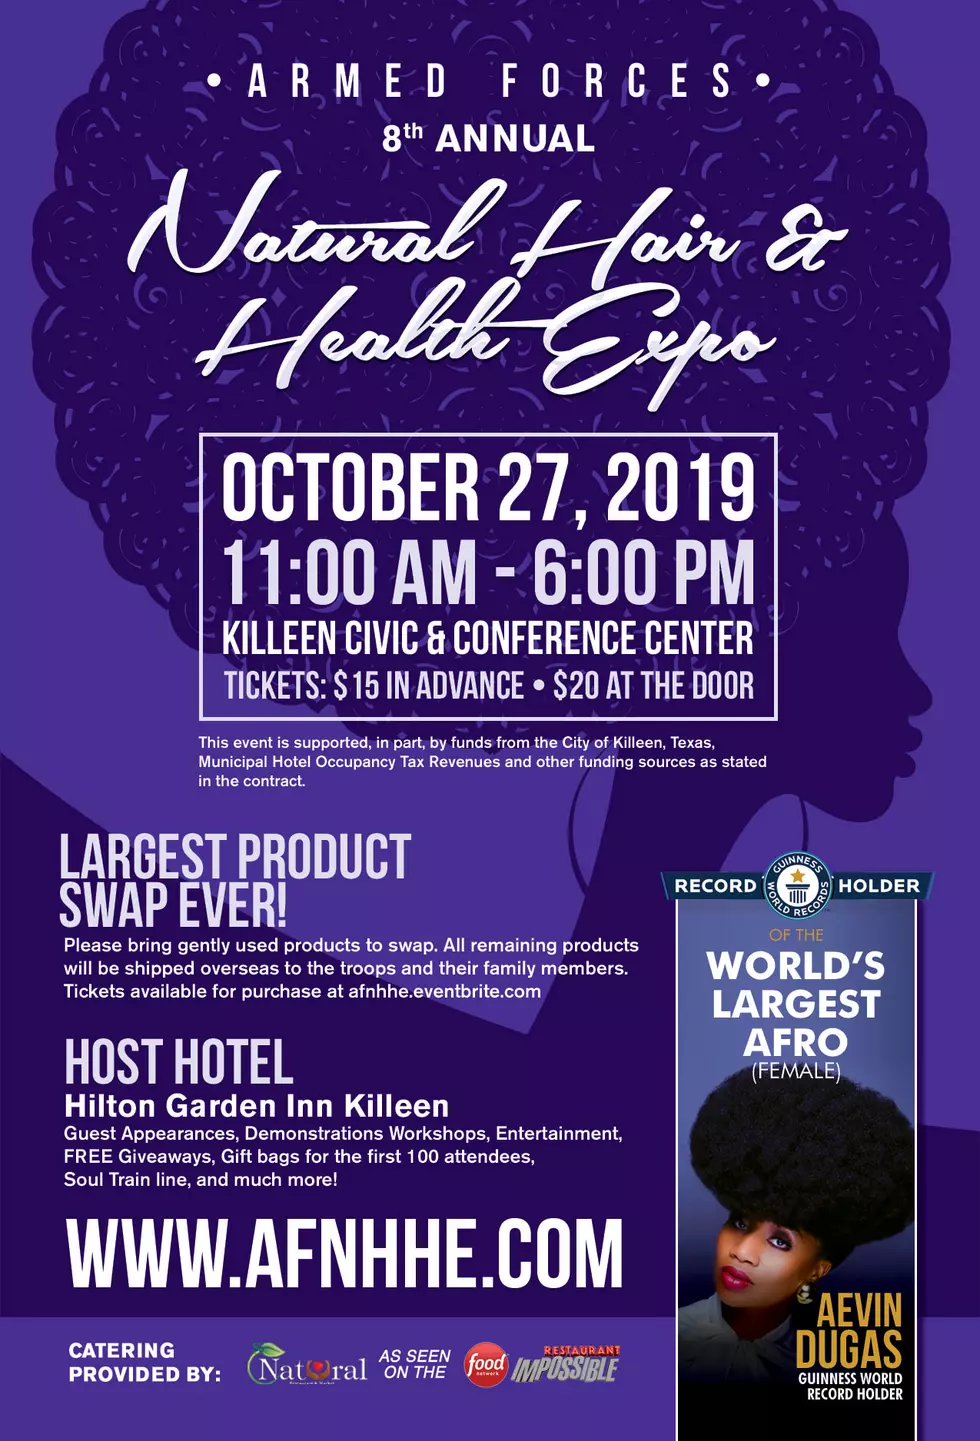 The 8th Annual Armed Forces Natural Hair &#038; Health Expo In Killeen